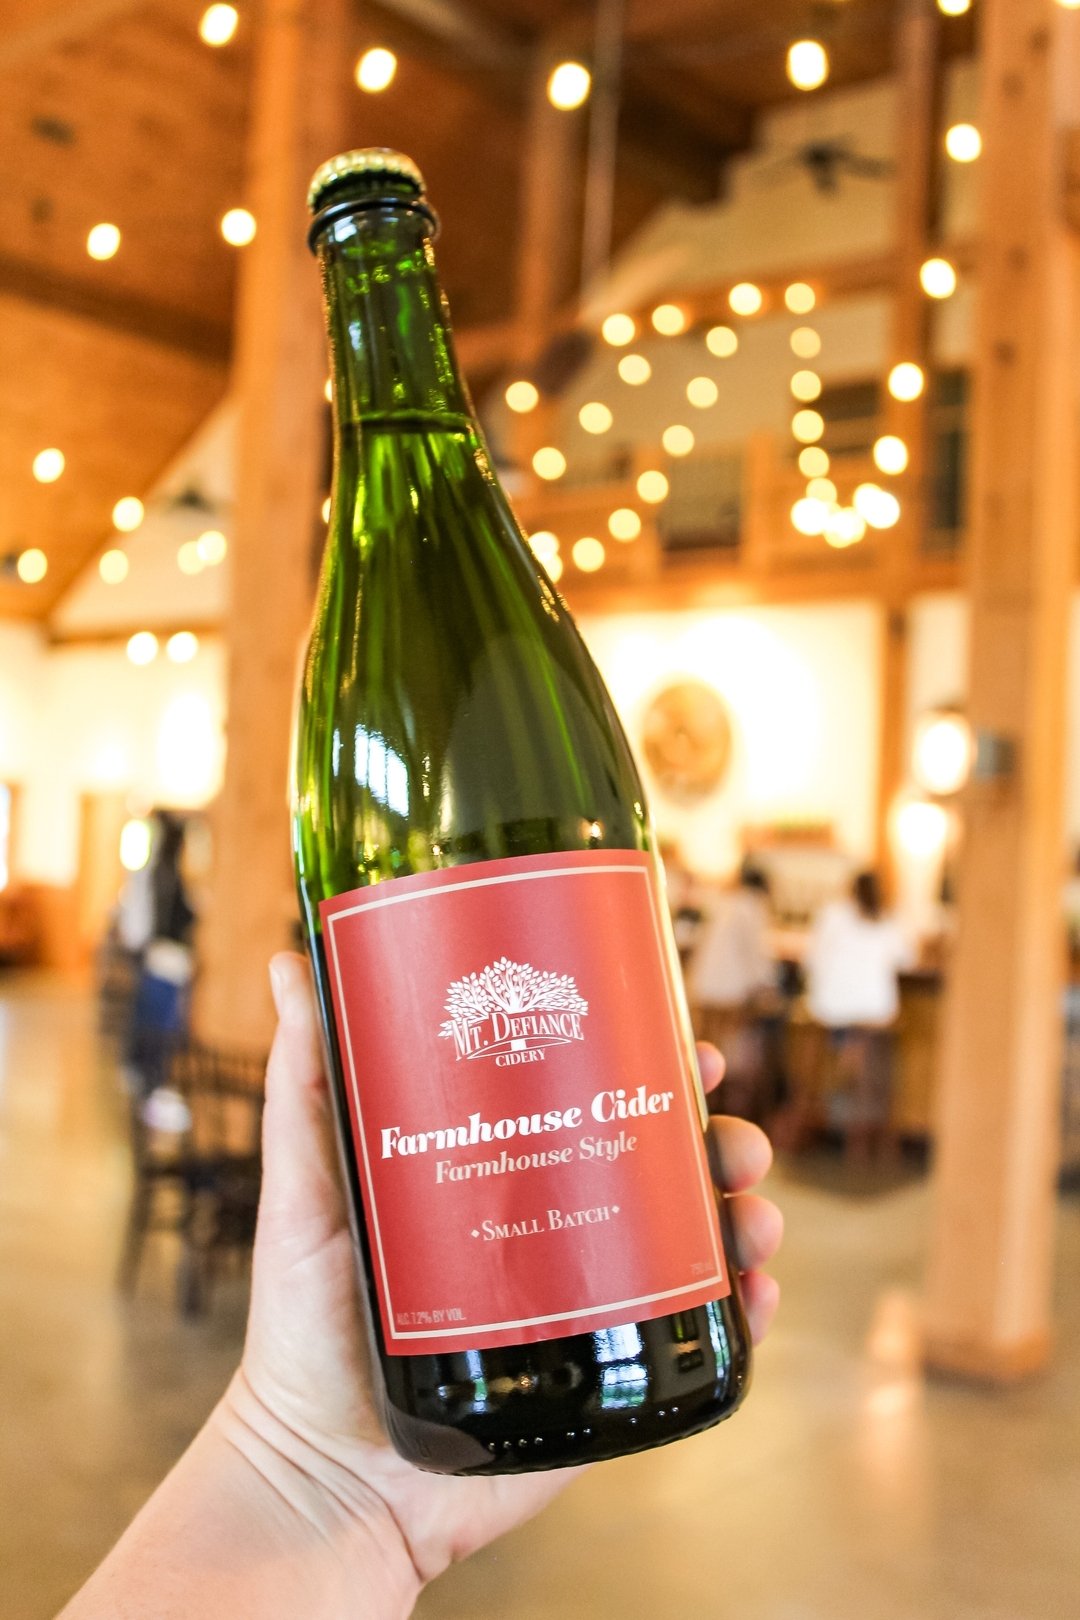 You can never go wrong with our classic Farmhouse cider. 

Mt. Defiance Cider is artisan crafted. Hand made in small batches, our cider uses the finest quality Virginia apples. Experience unpasteurized, unsweetened, traditional dry cider on its own o